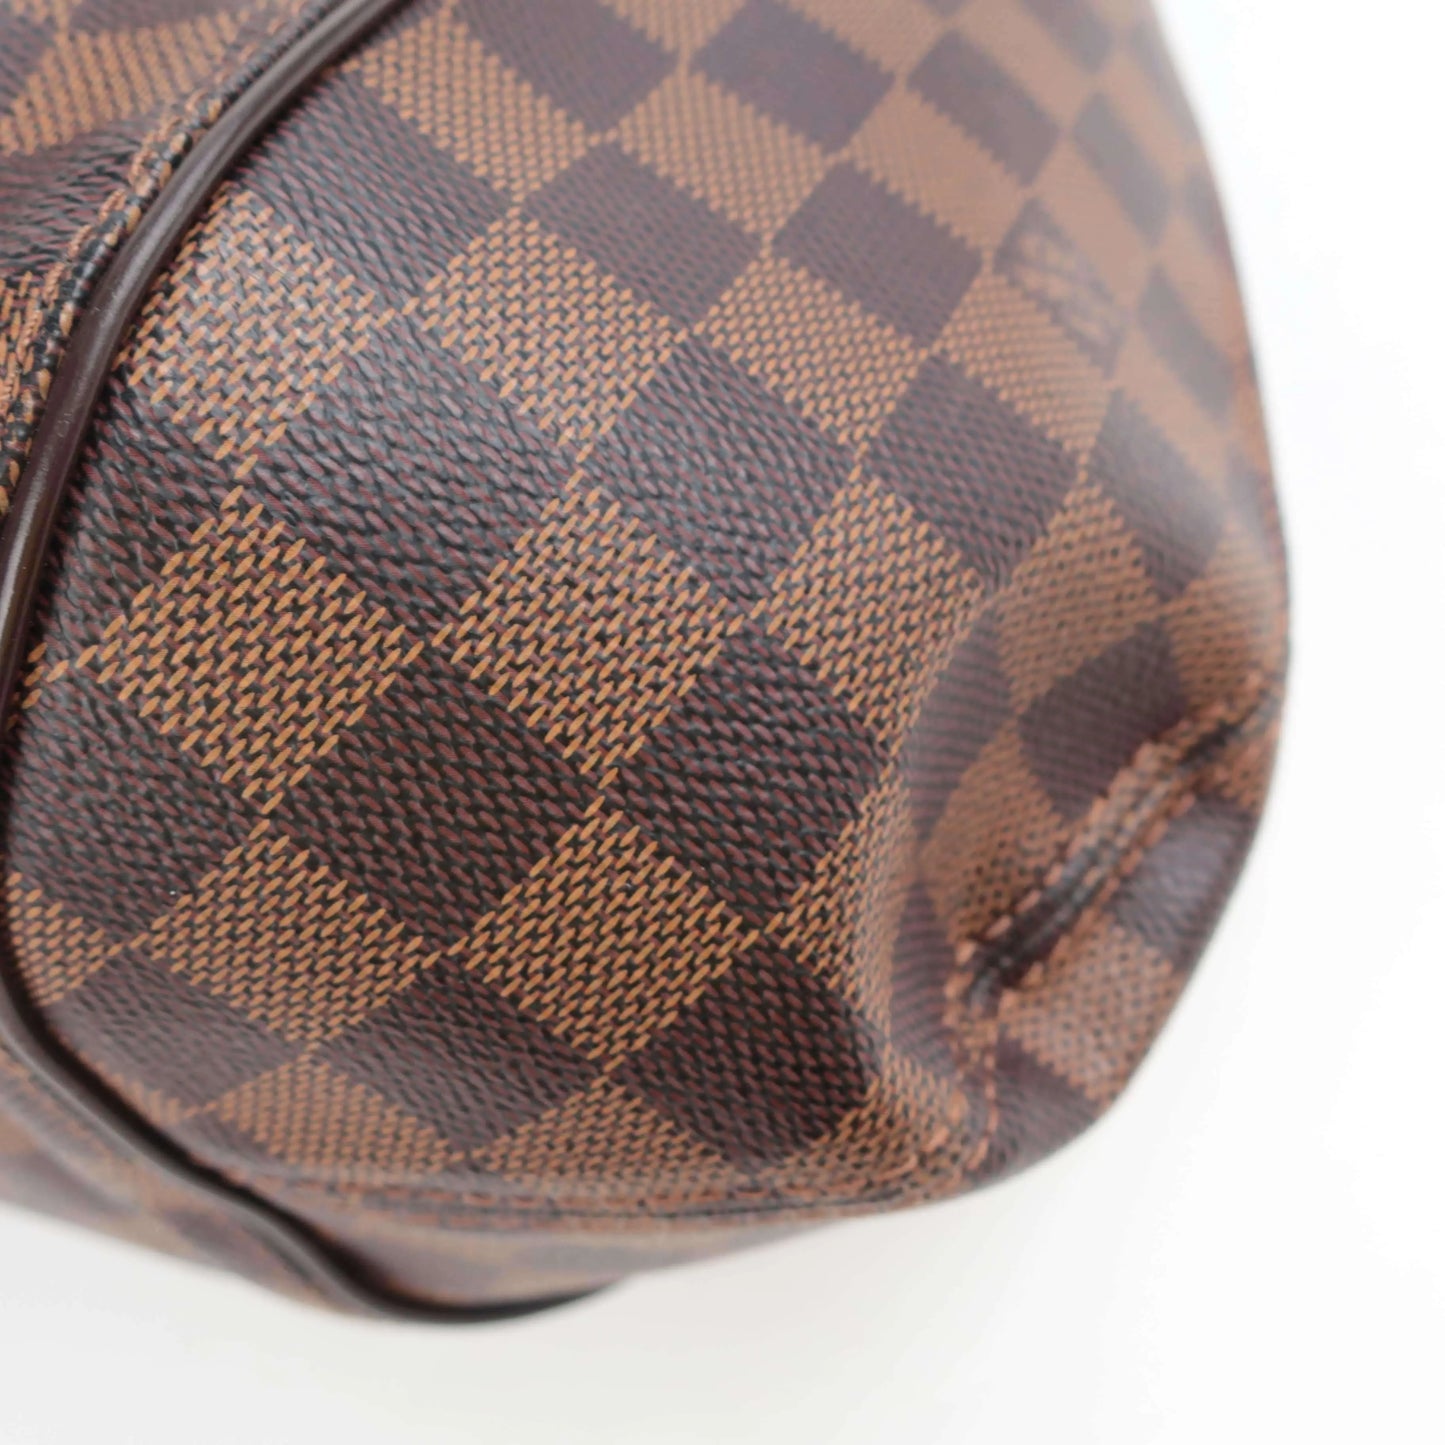 Louis Vuitton Real or Fake: Authenticating an LV Sistina GM with